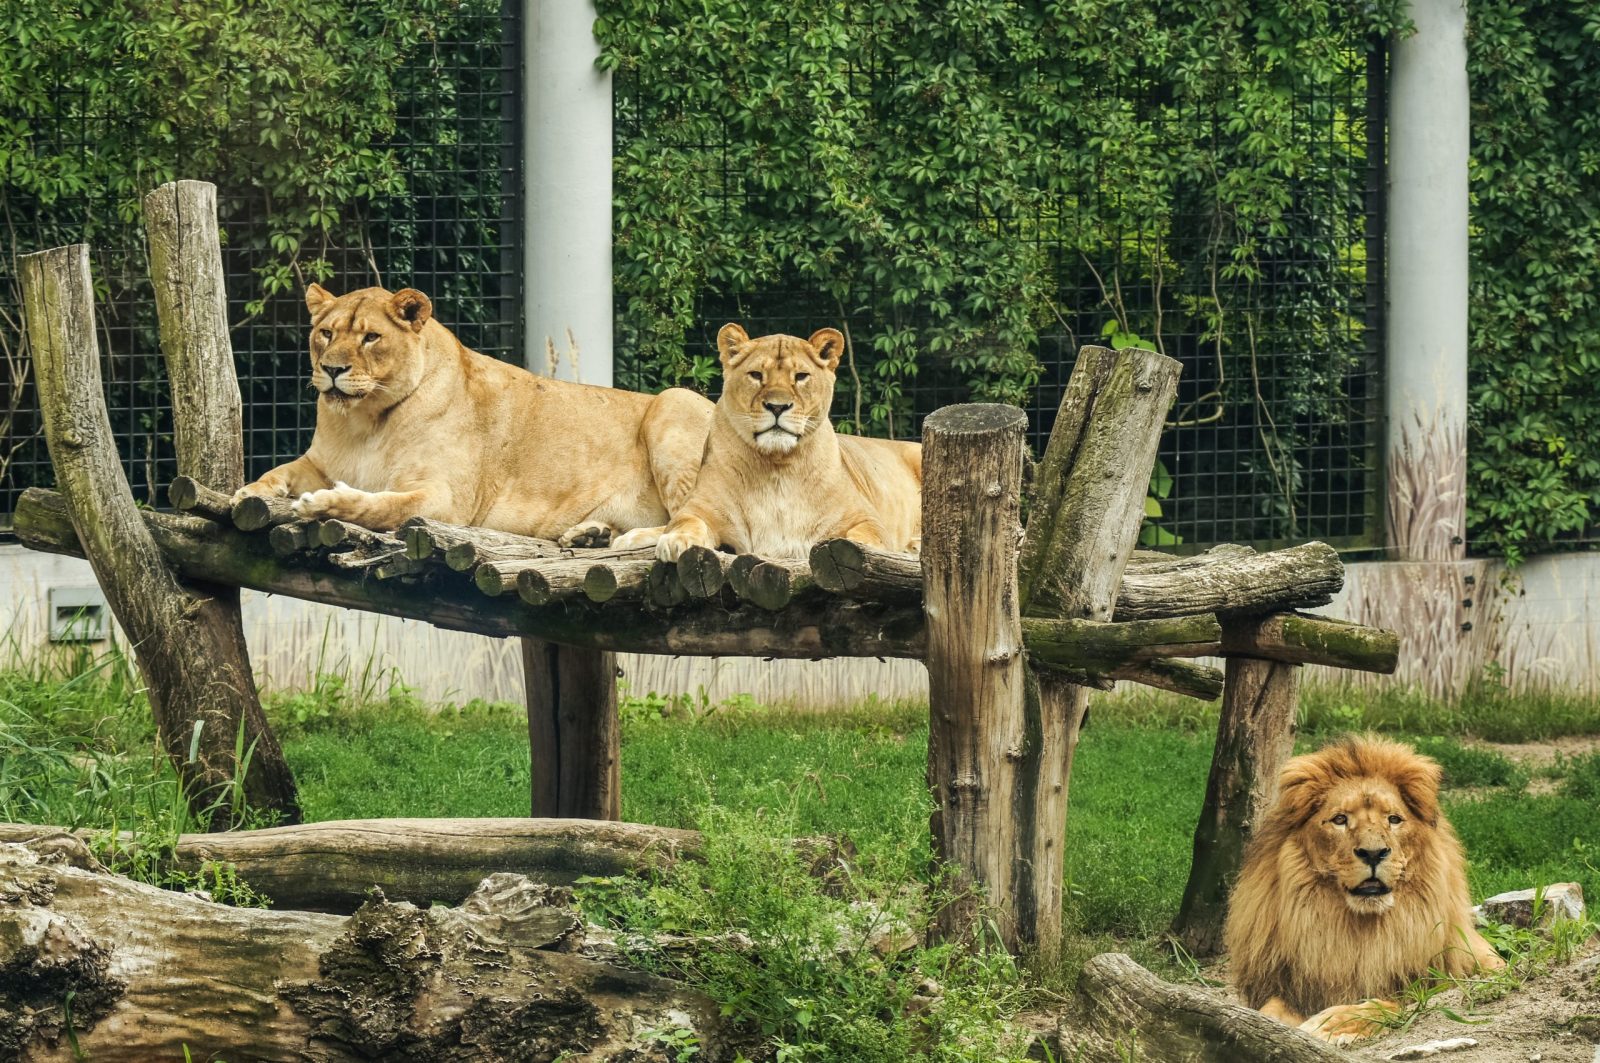 Lions in a zoo enclosure